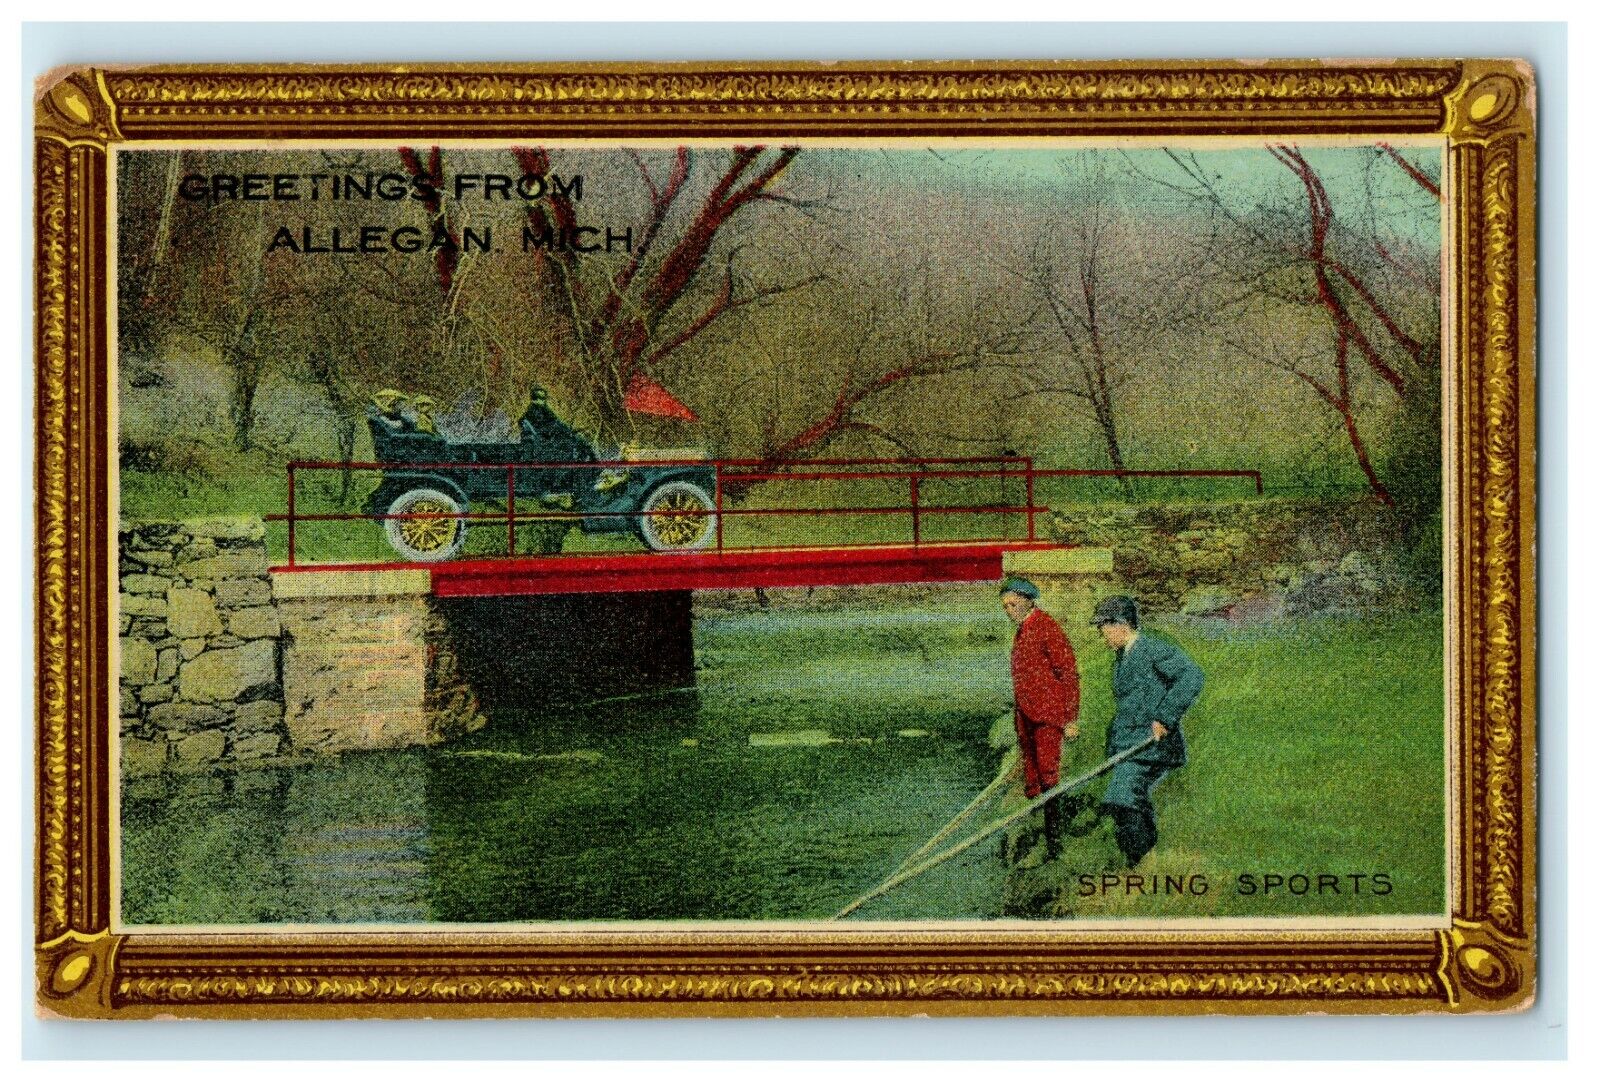 1912 Two People Fishing, And A Car Greetings from Allegan Michigan MI Postcard